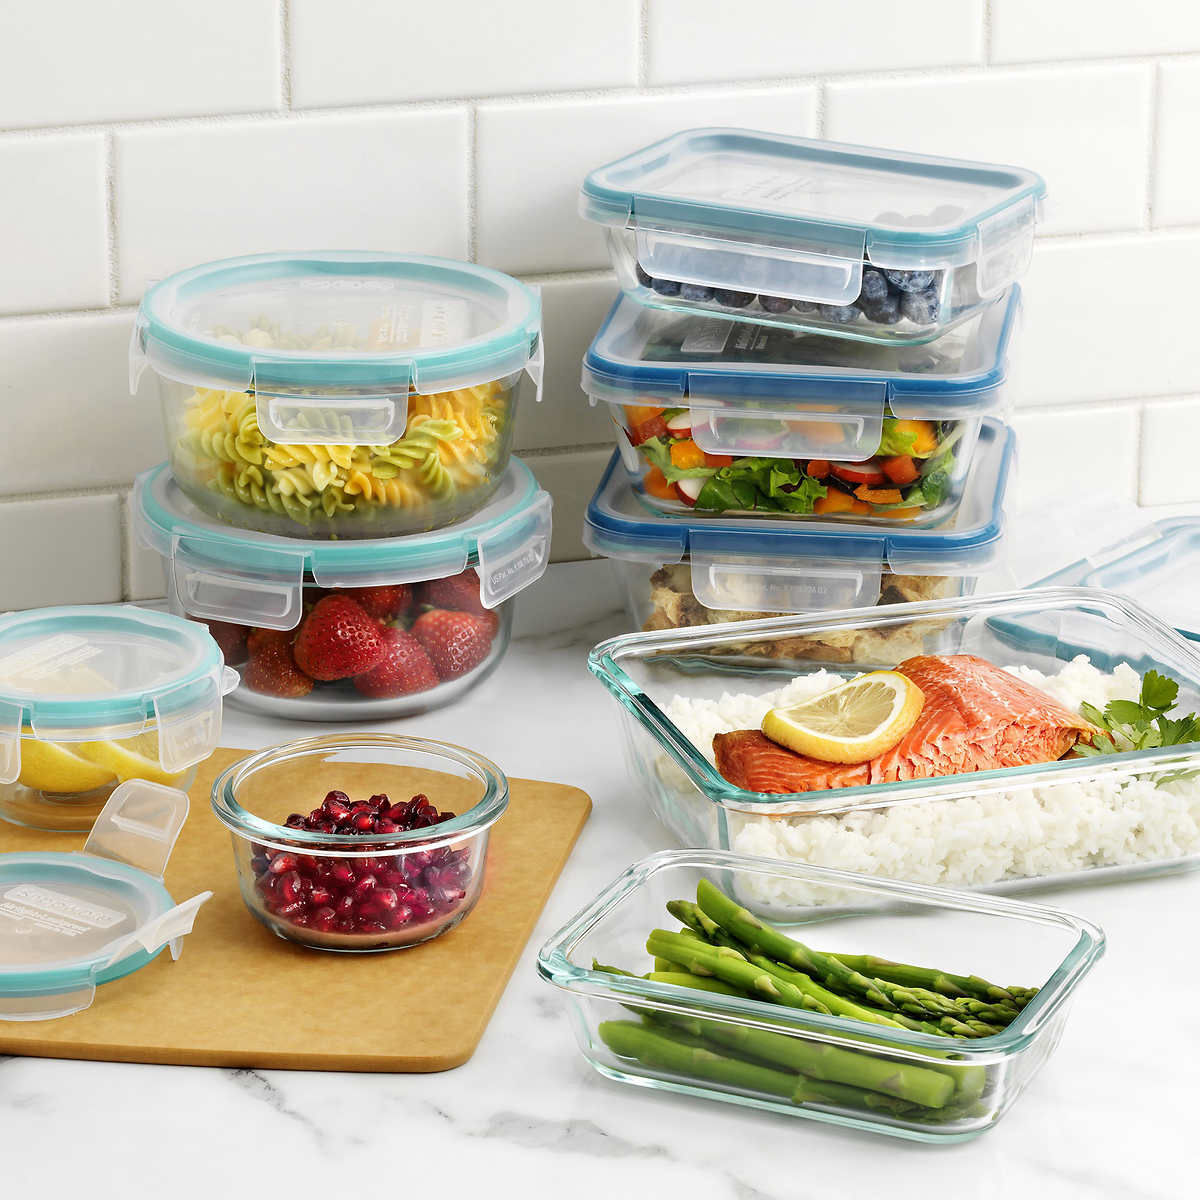 Snapware 4-Cup Total Solution Round Food Storage Container, Glass